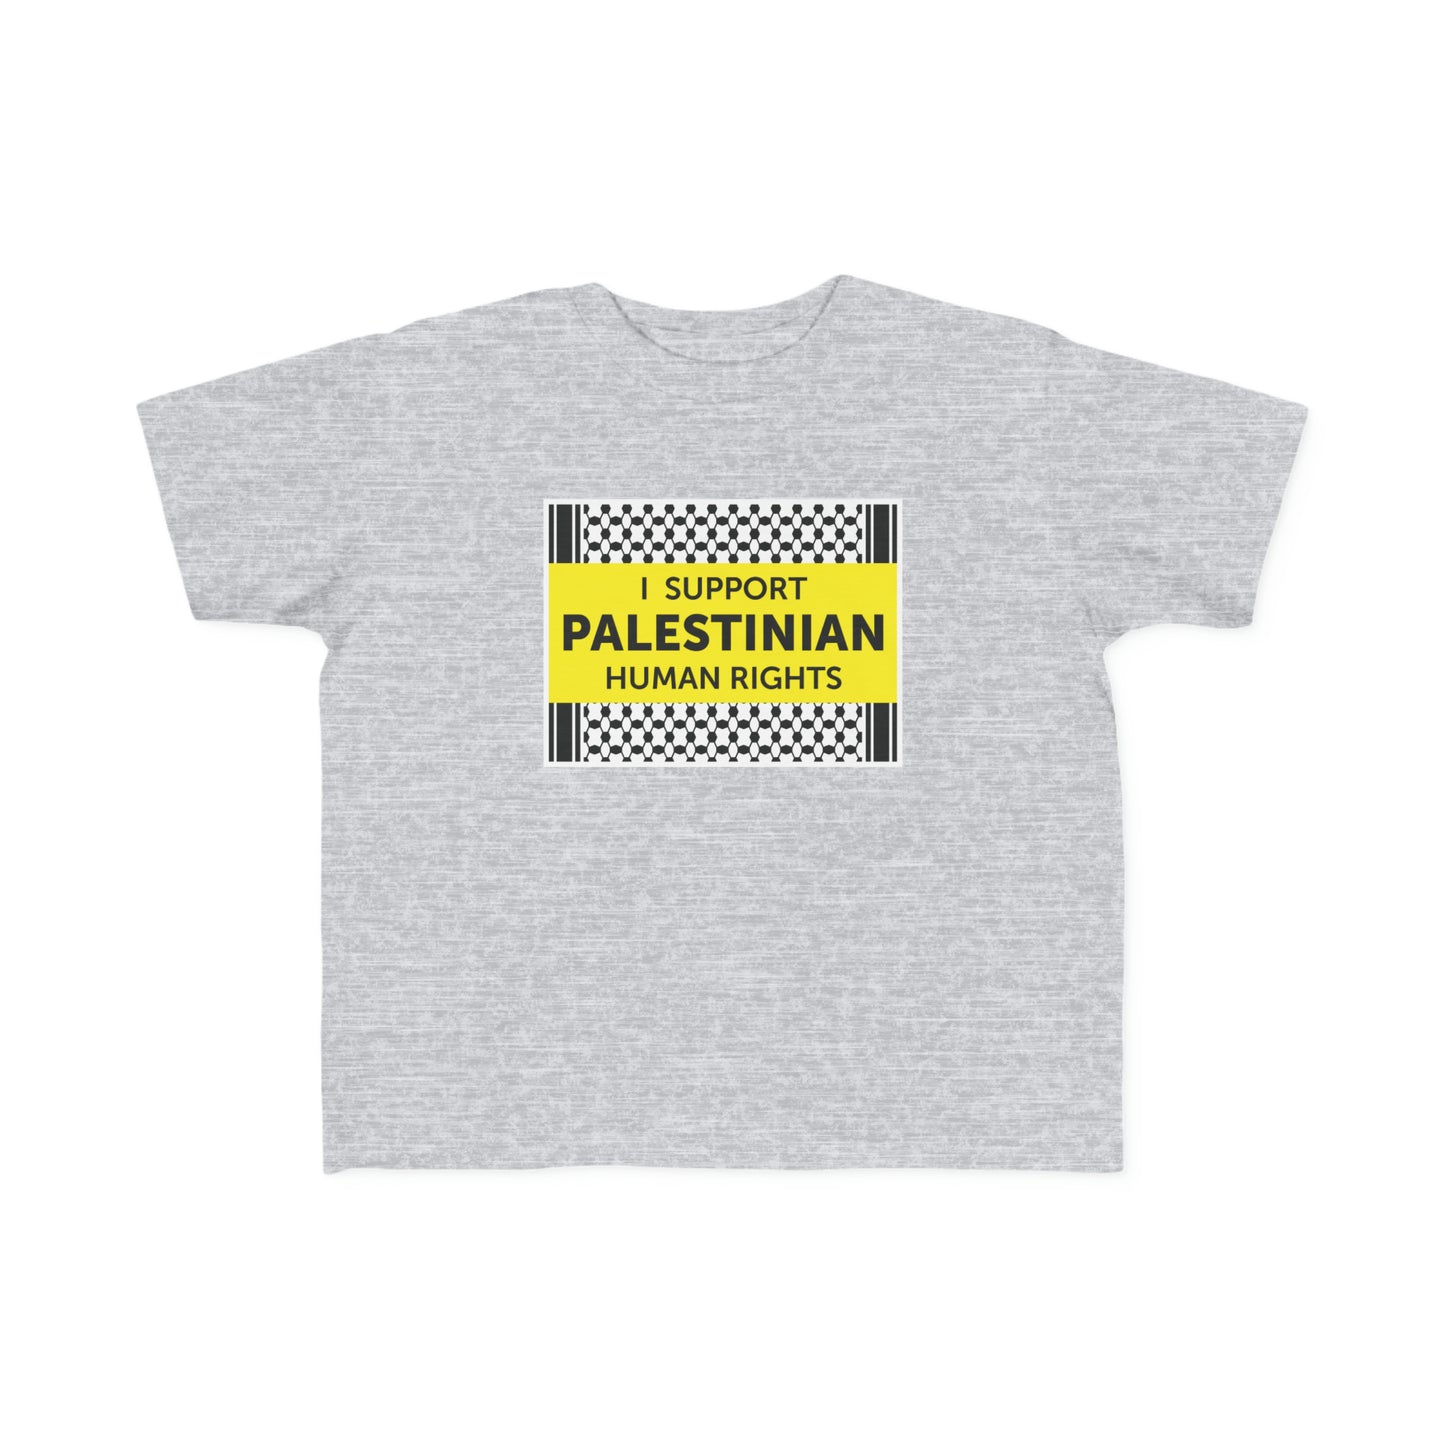 “I Support Palestinian Human Rights” Toddler's Tee